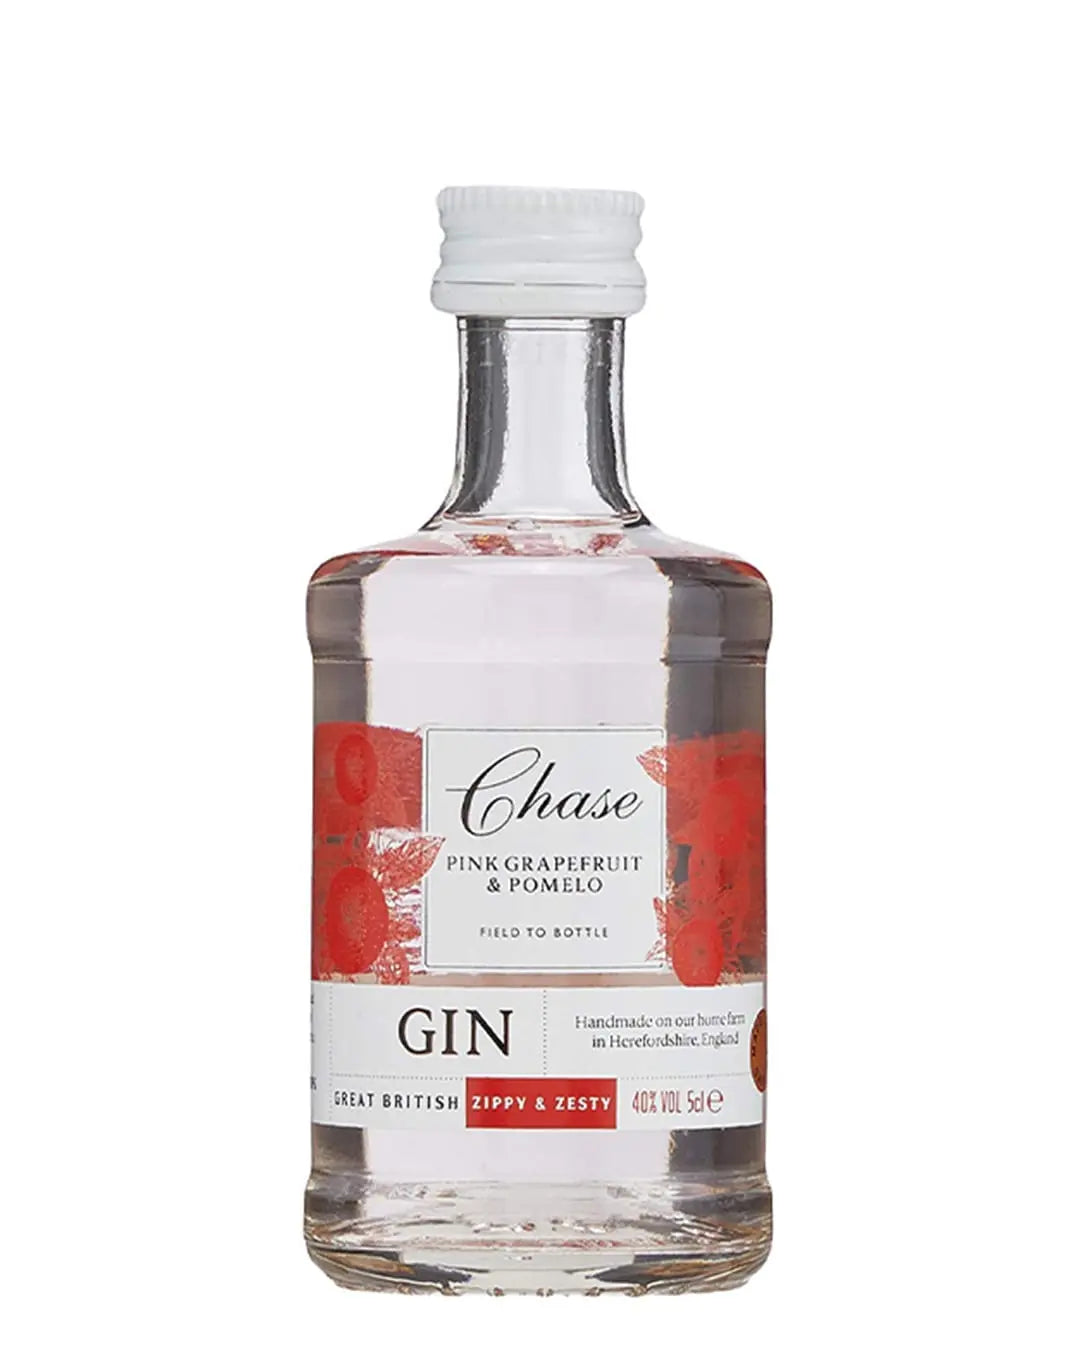 Chase Pink Grapefruit & Pomelo Gin miniature, 5 cl Spirit Miniatures 5060183134829